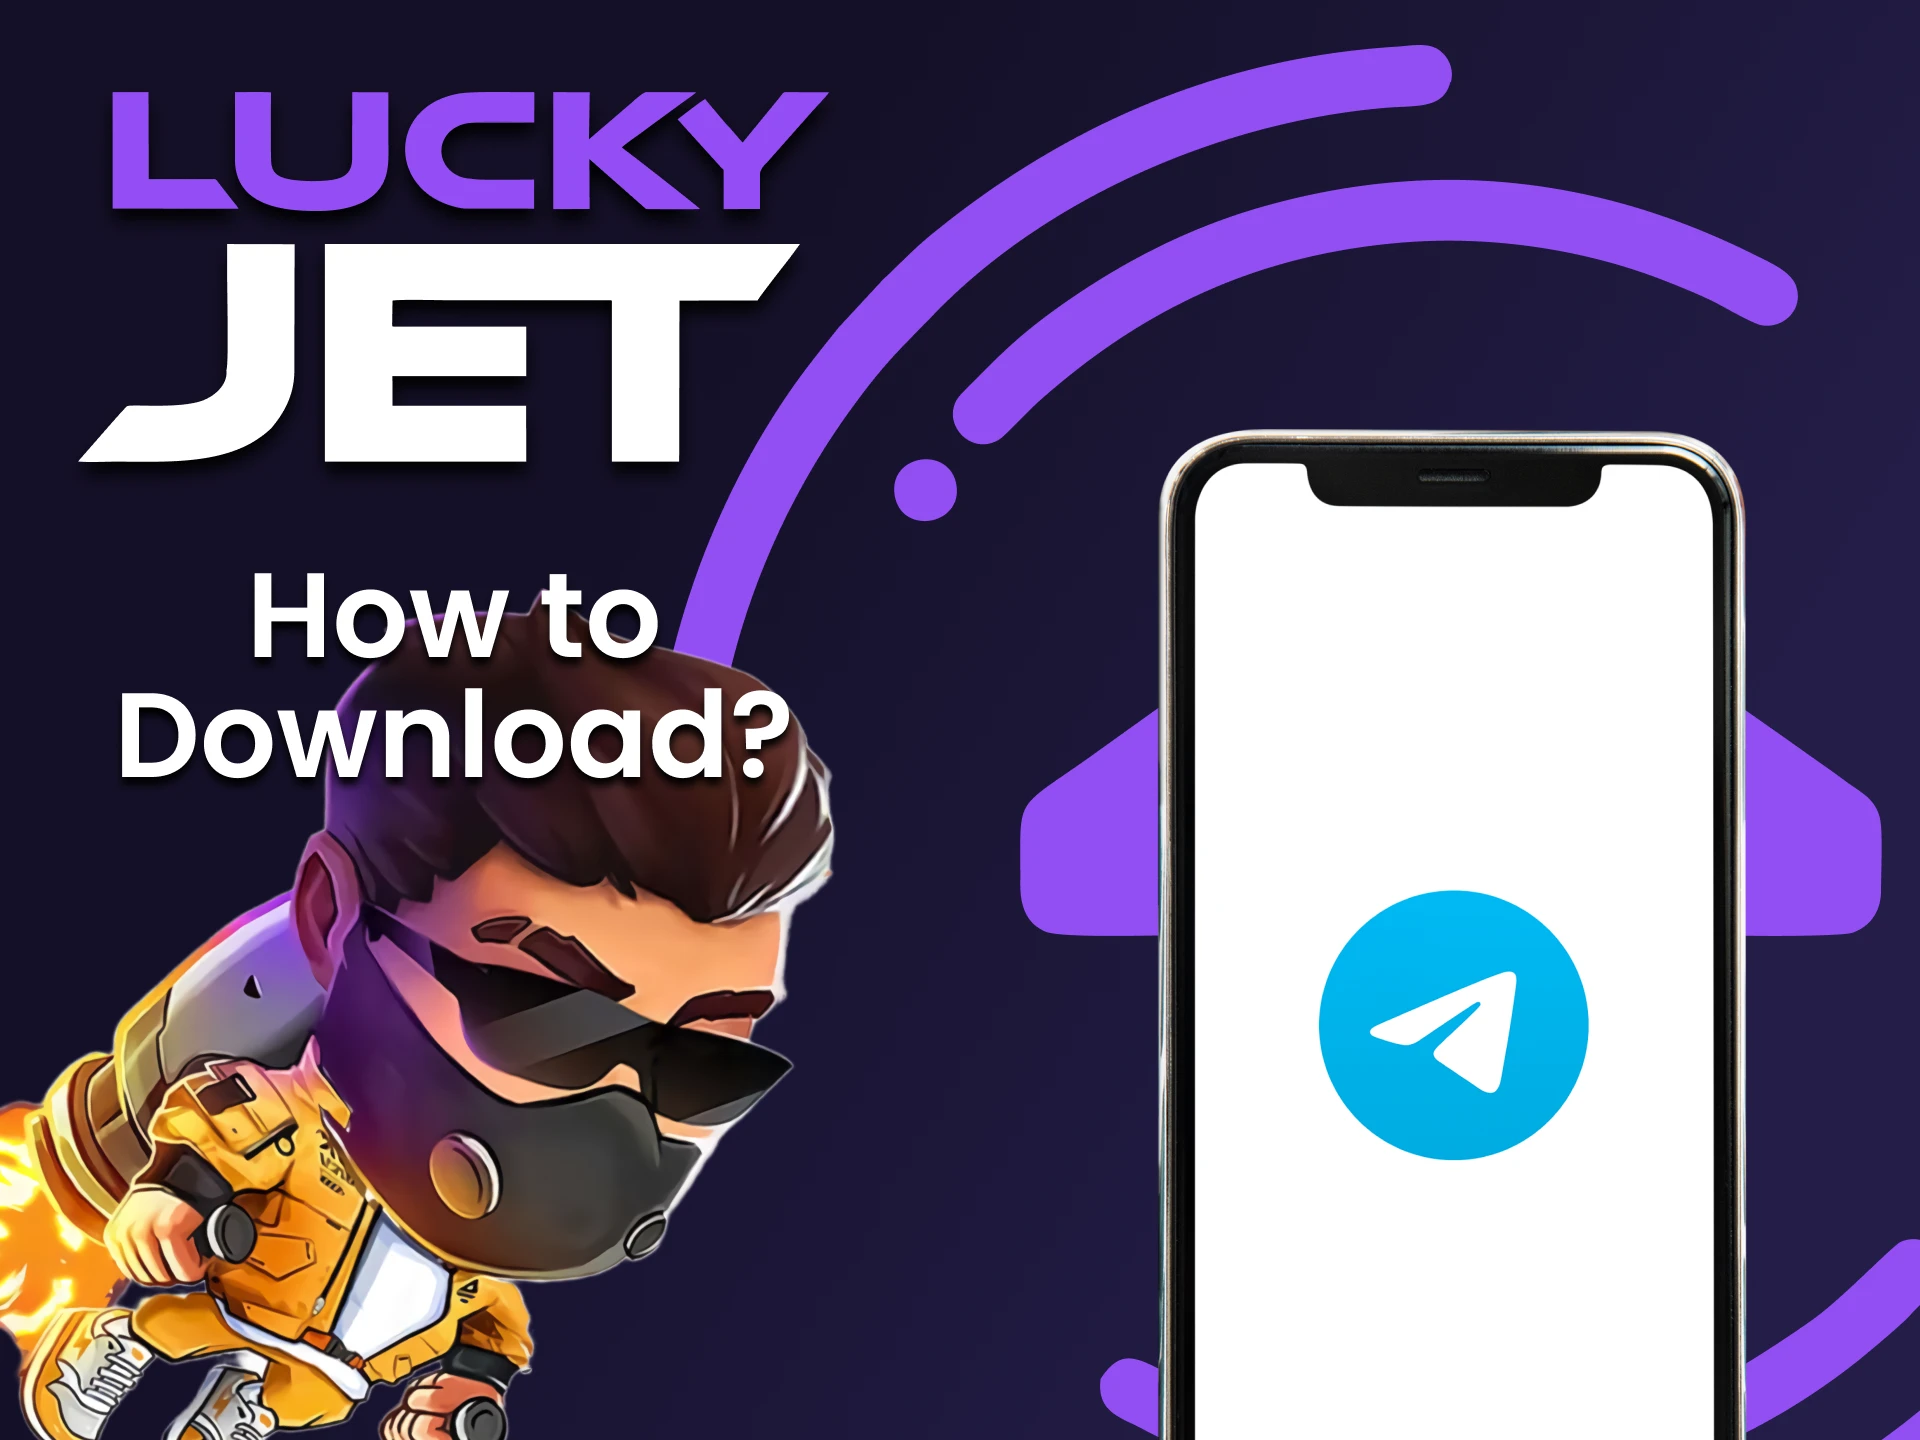 We will show you how to download signals for Lucky Jet.